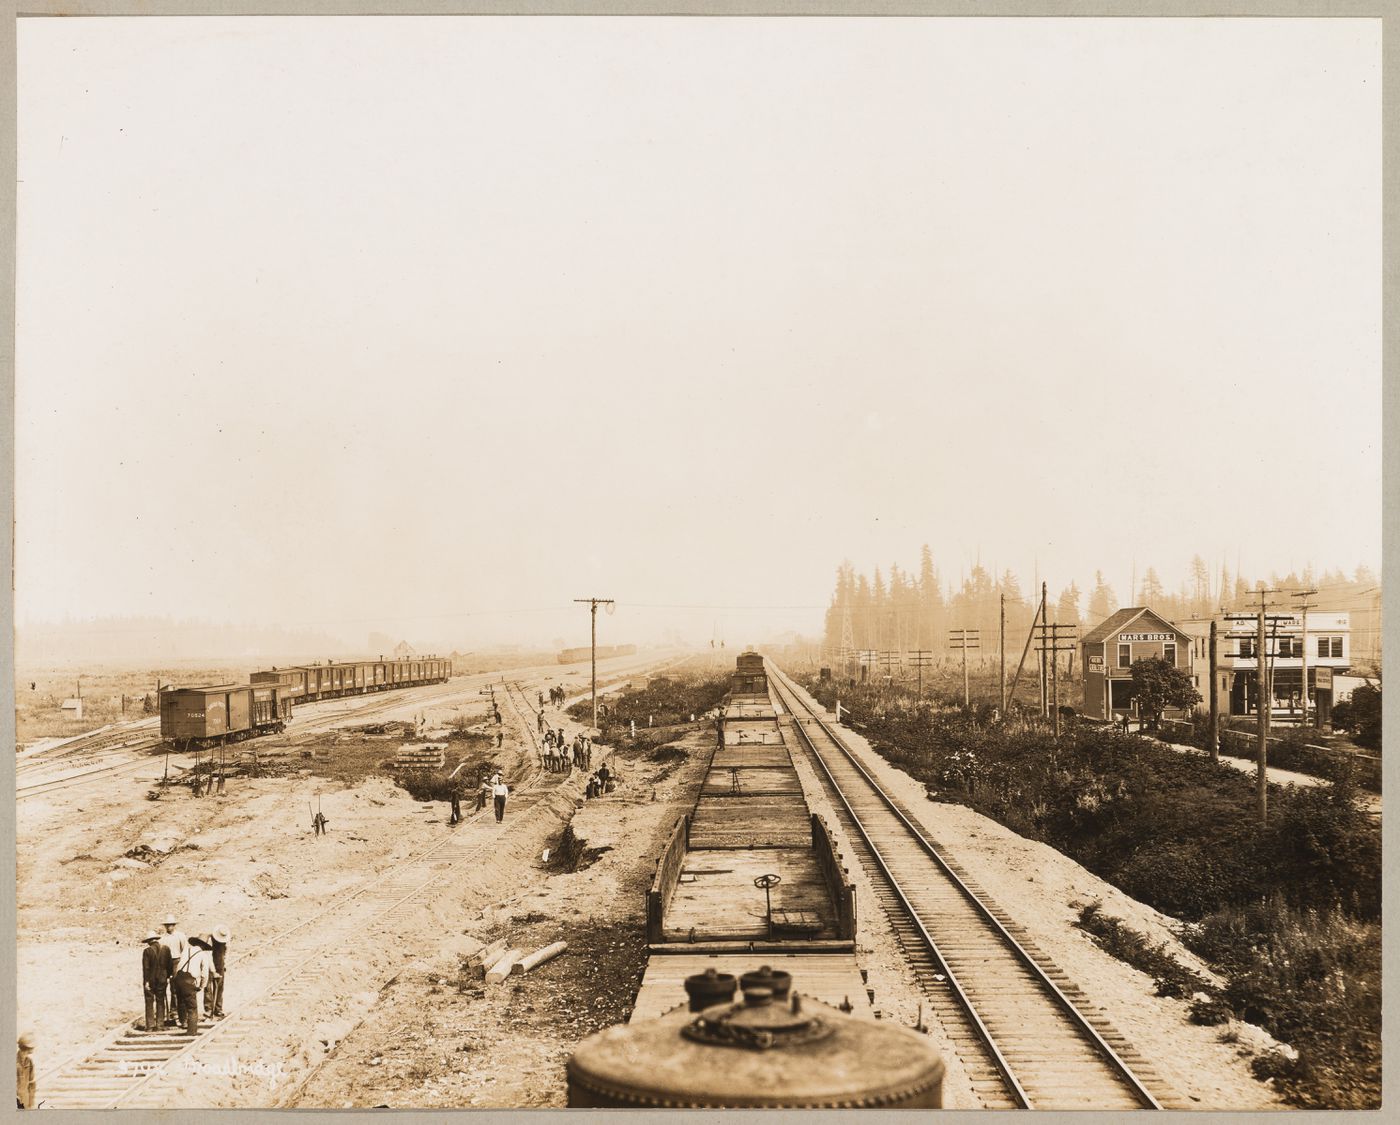 View of the Canadian Pacific Railroad Company freight yards under construction showing workers and trains, Coquitlam (now Port Coquitlam), British Columbia